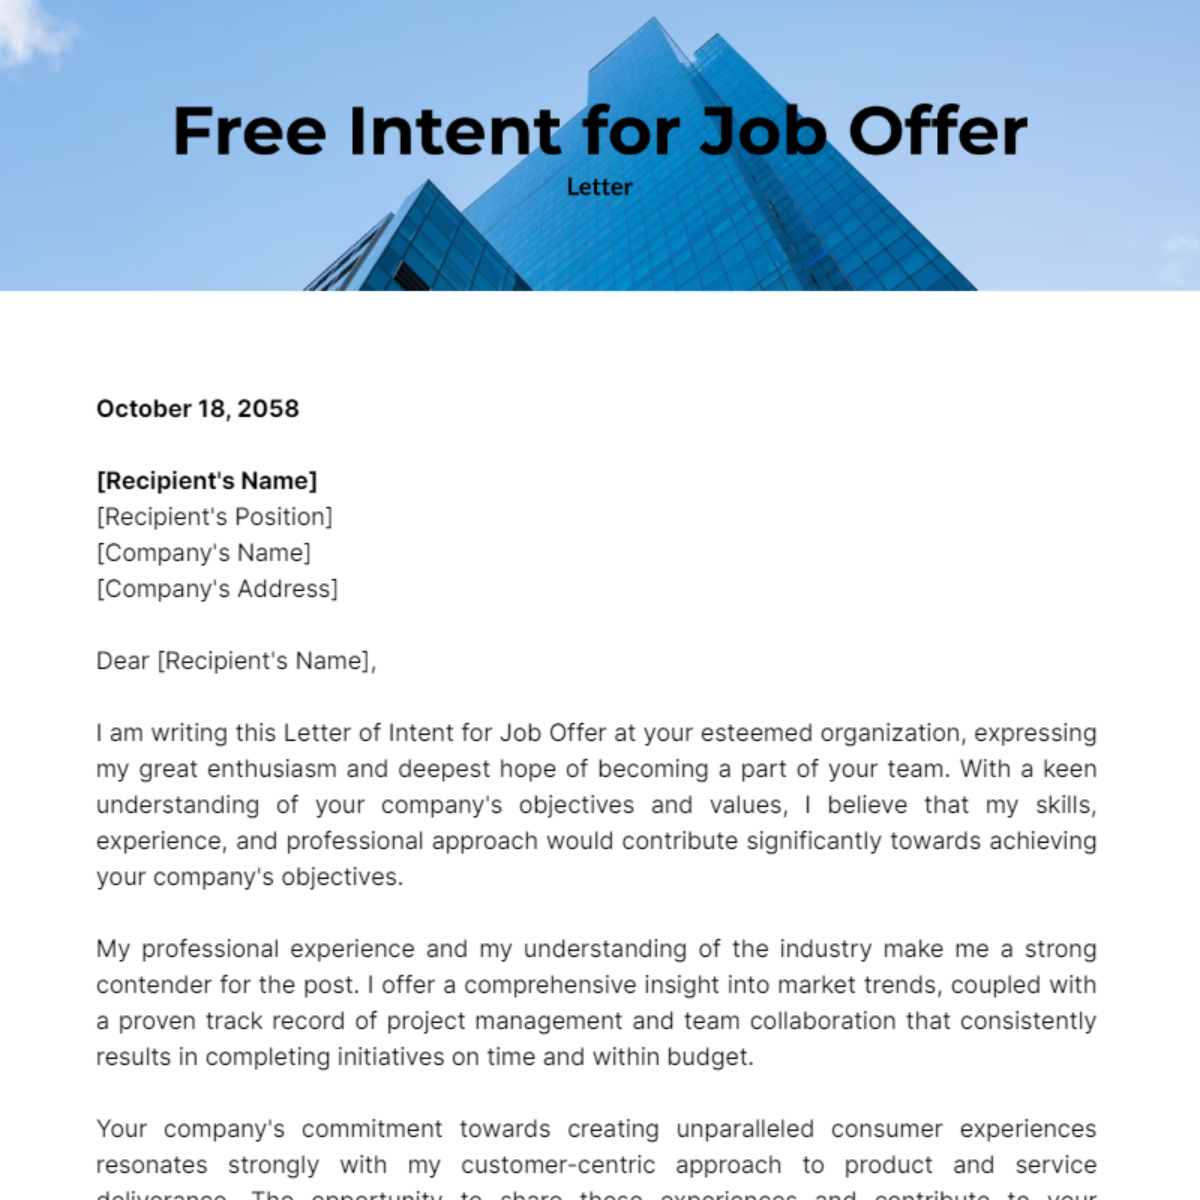 Letter of Intent for Job Offer Template